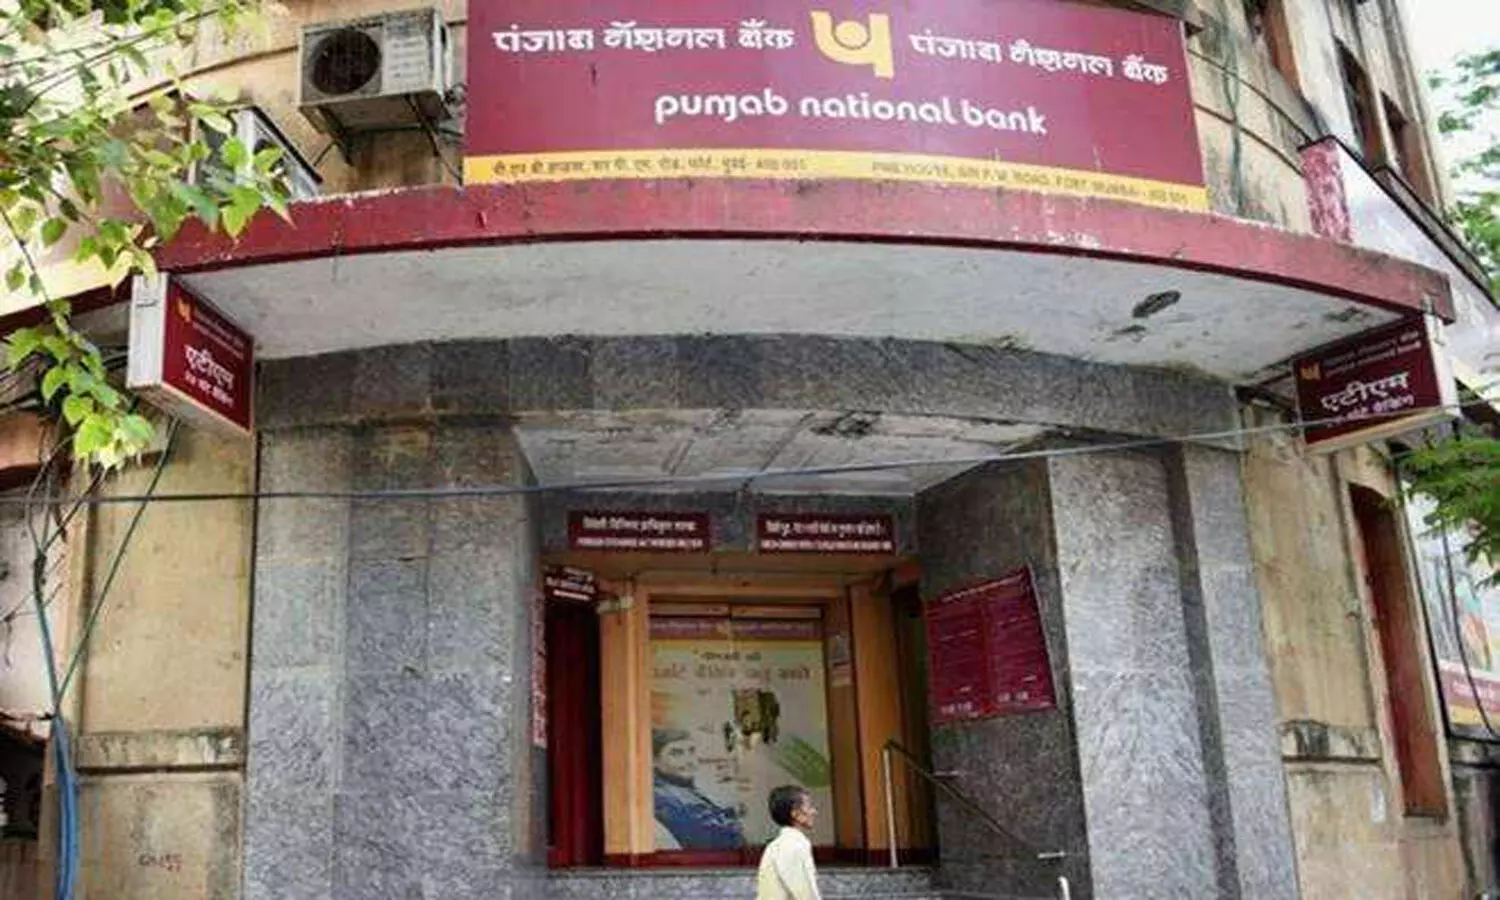 Covid positive PNB employee joins duty with oxygen support, says denied leave; bank calls it drama